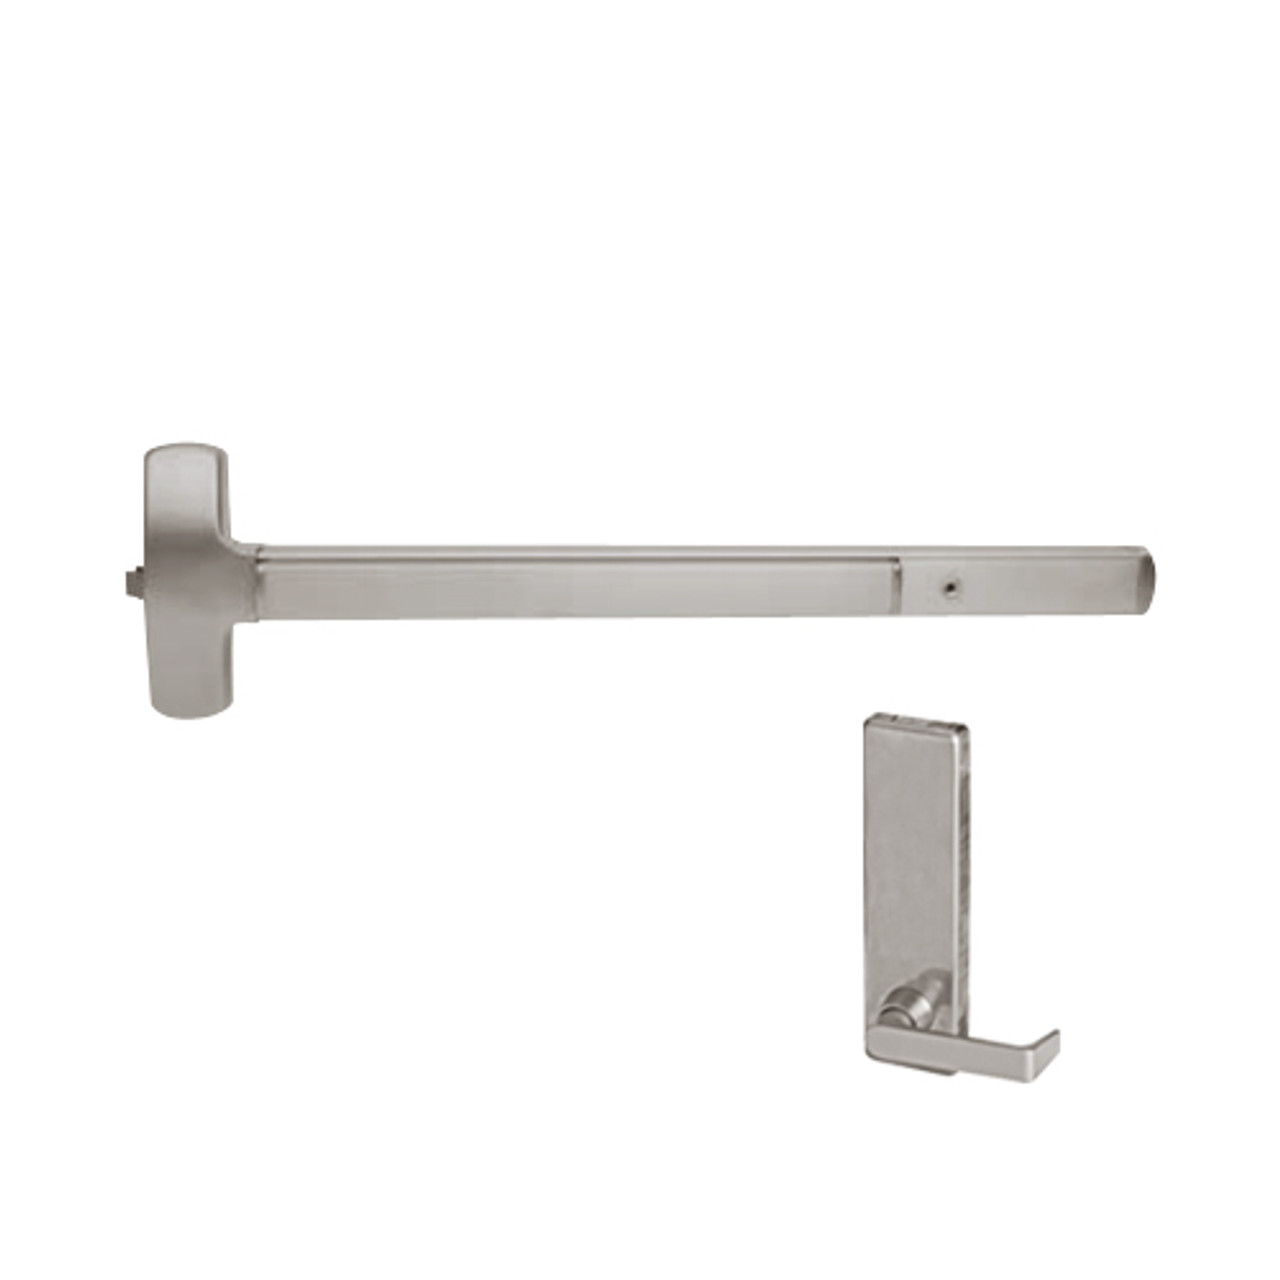 25-R-L-DT-DANE-US32D-4-LHR Falcon Exit Device in Satin Stainless Steel